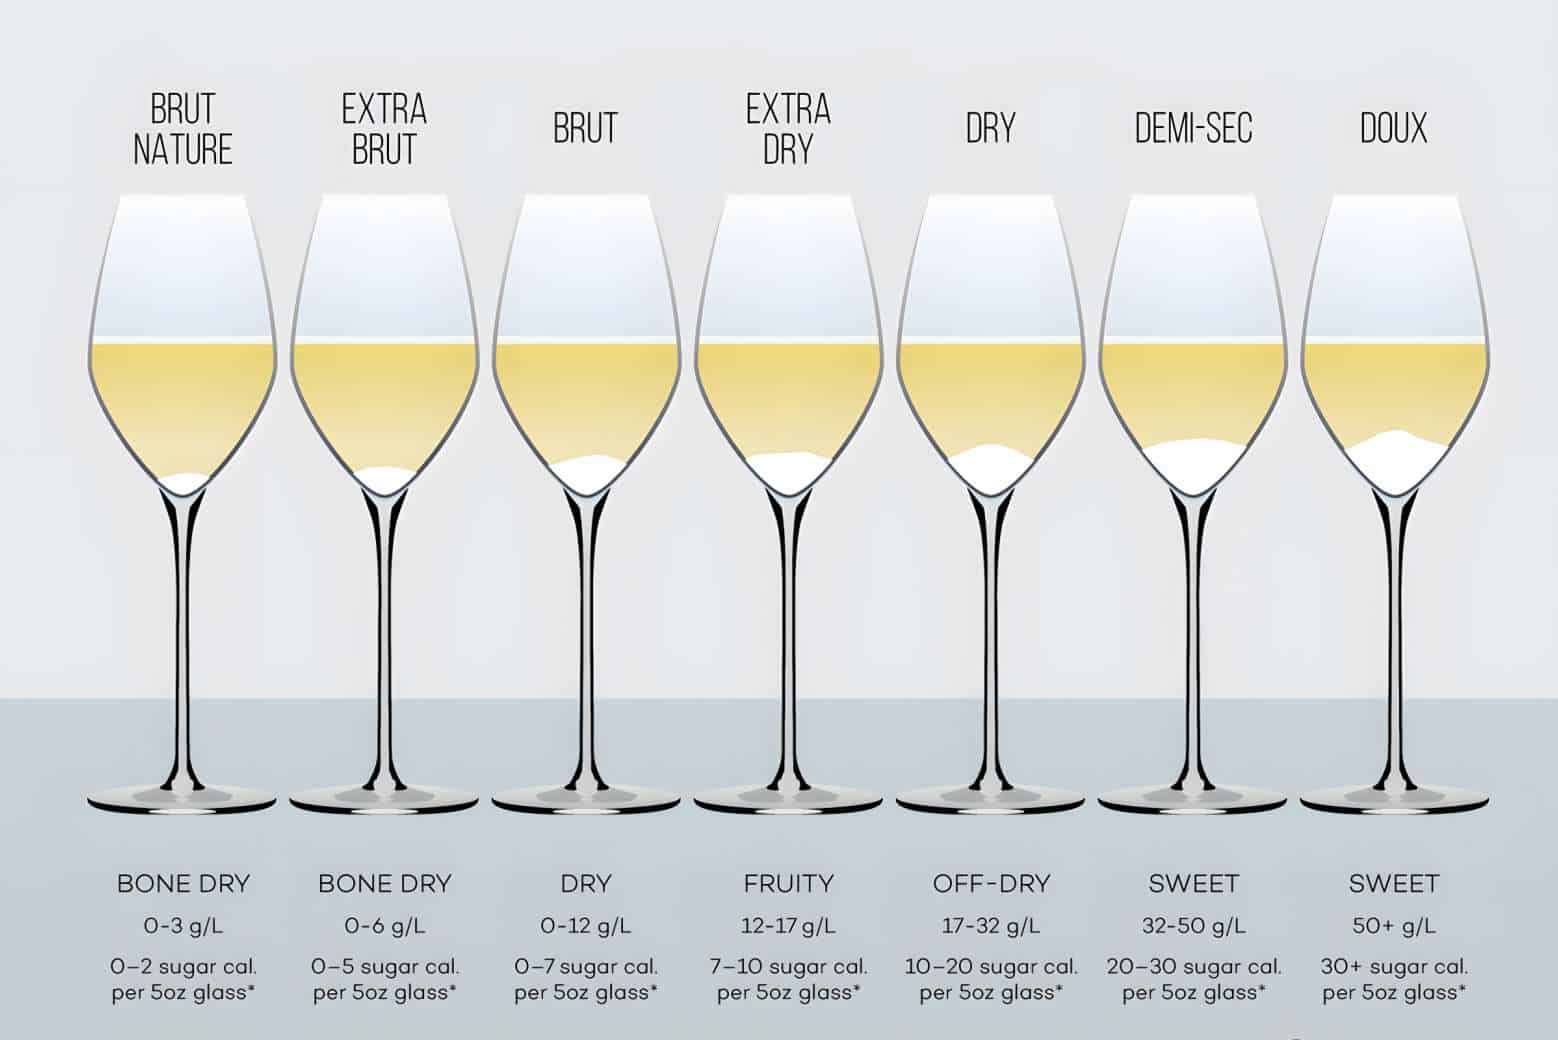 The Sugar Content of White Wine and Its Calorie Count